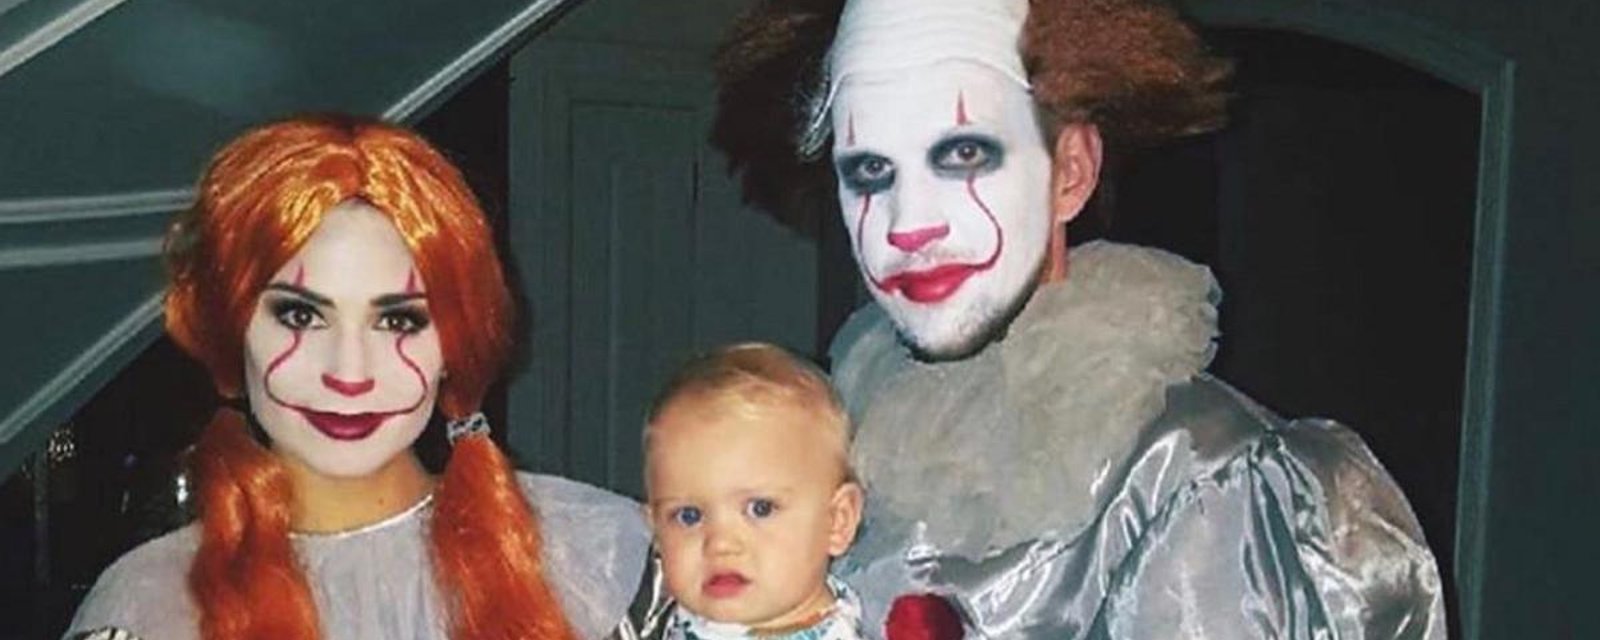 The best Halloween costumes of the year from NHL players.... so far.